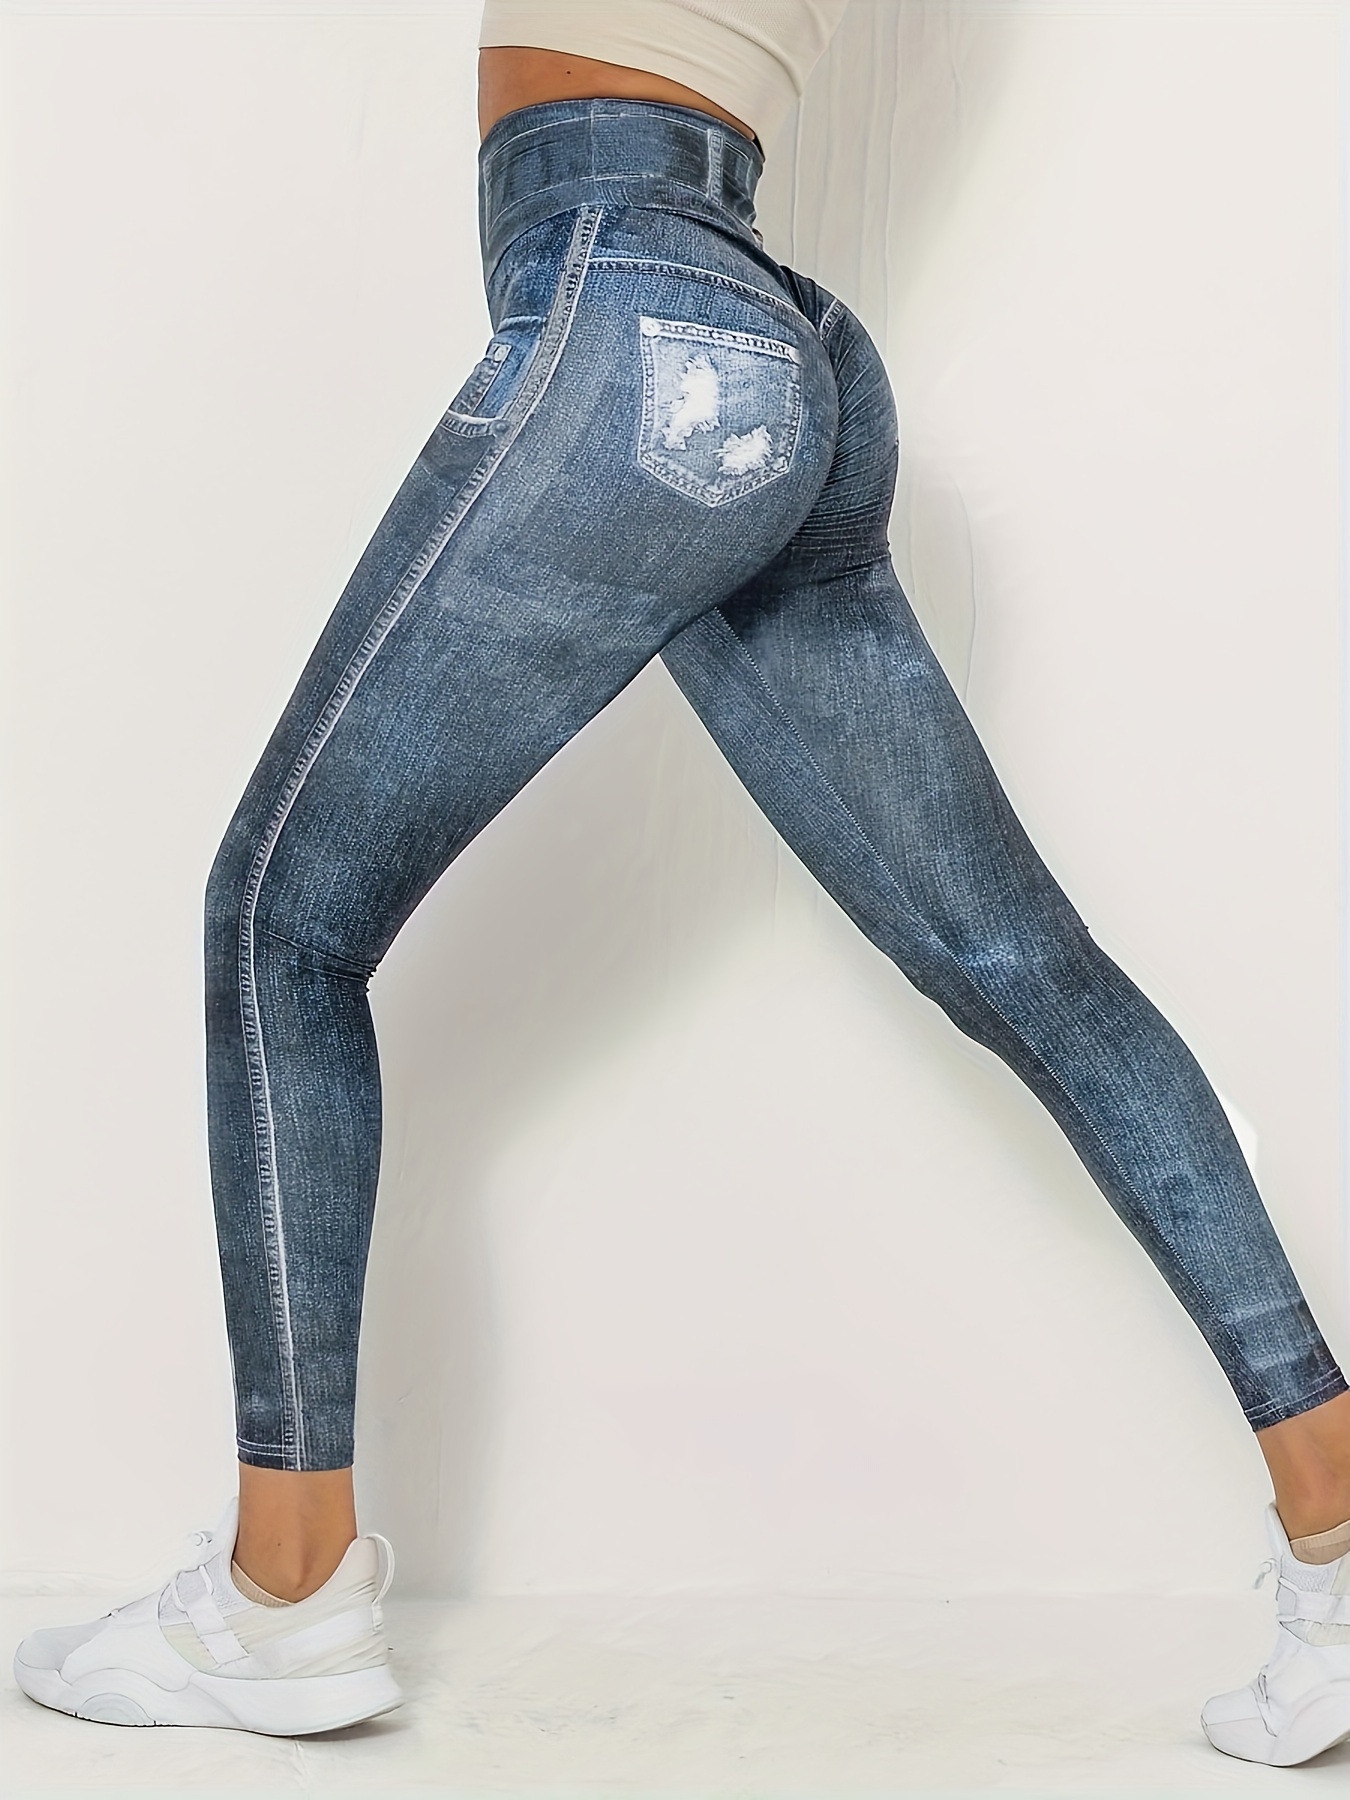 Dropship Butterfly & Denim Print Skinny Leggings; Stretchy High Waist  Lifting Yoga Leggings to Sell Online at a Lower Price